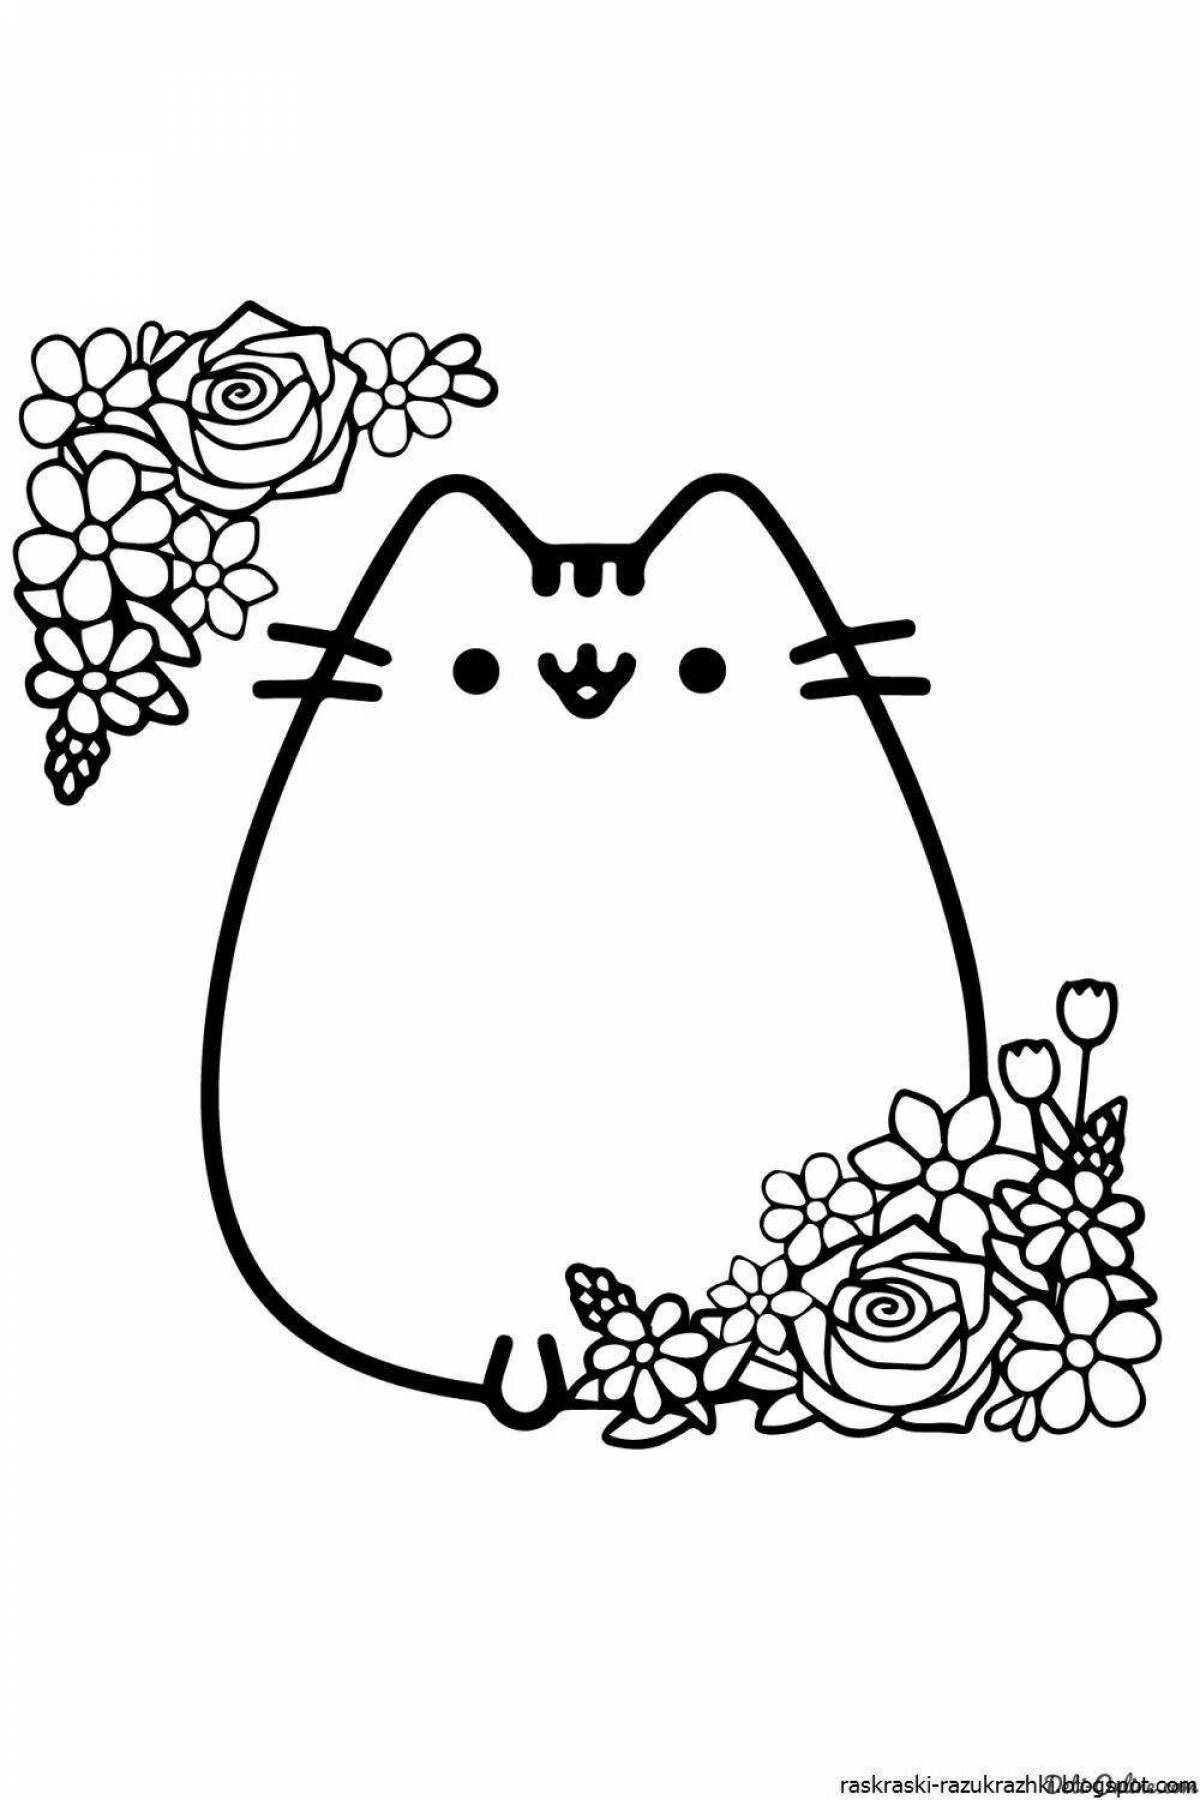 Coloring page gorgeous pusheen cat